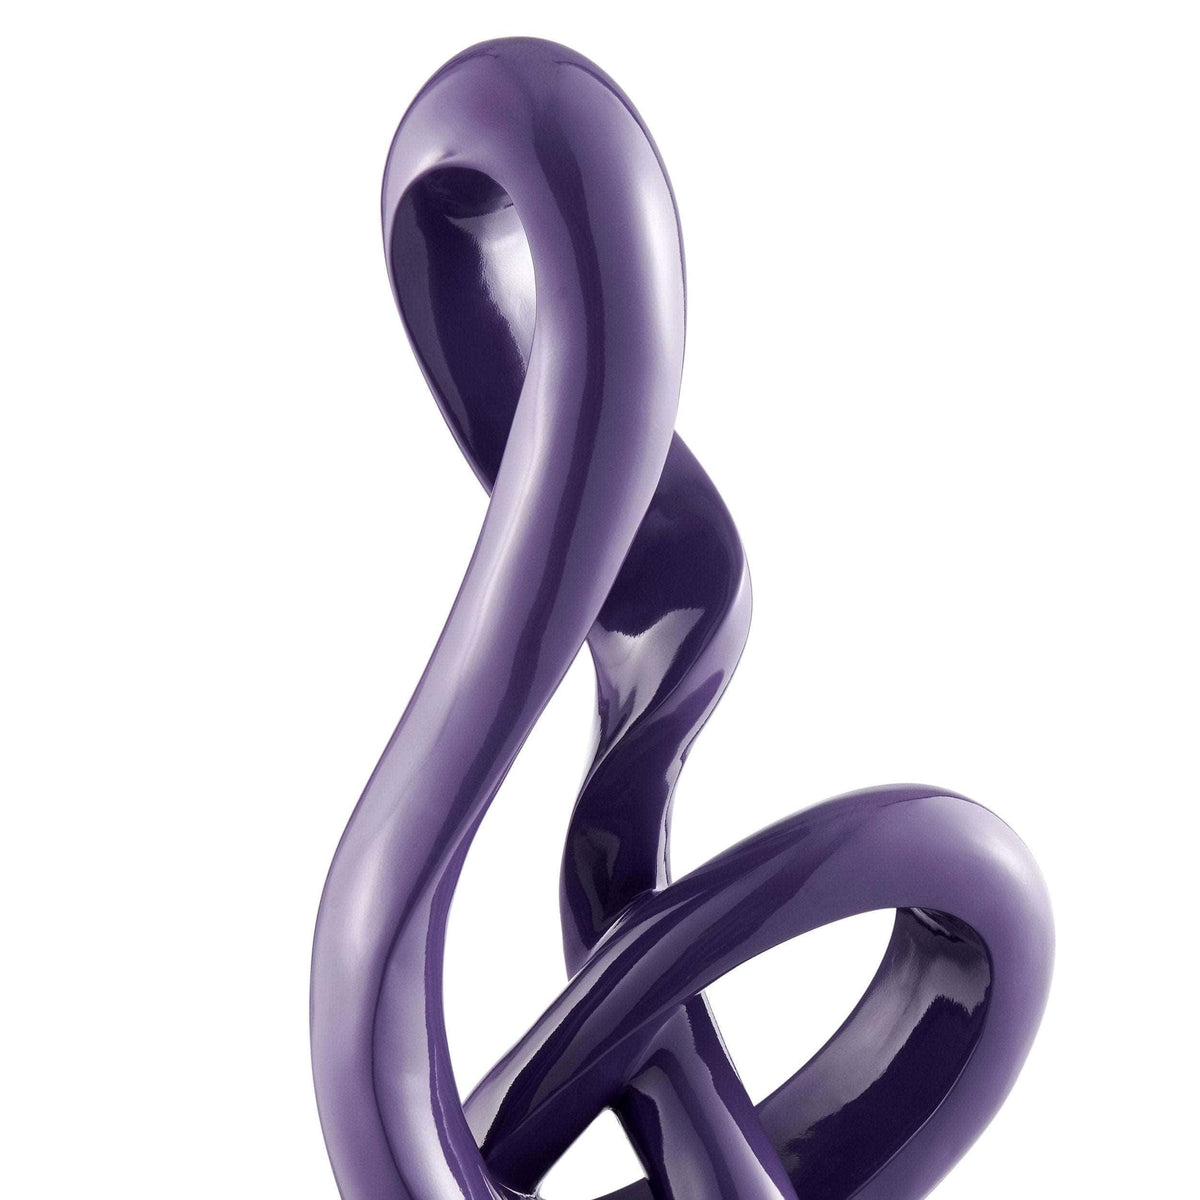 Antilia Abstract Modern Sculpture in Violet